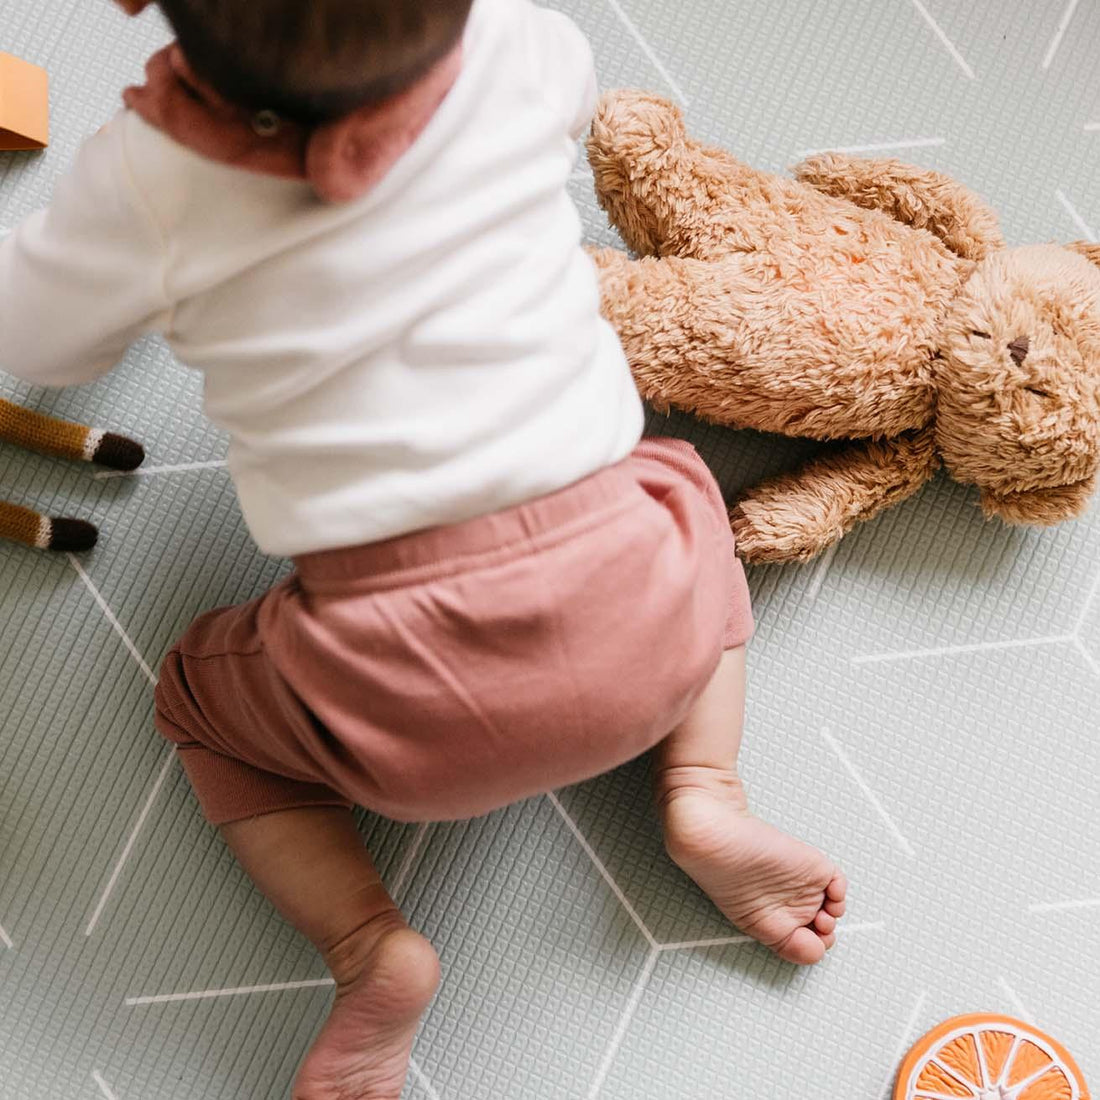 The Best Baby Play Mats in AUS in 2022